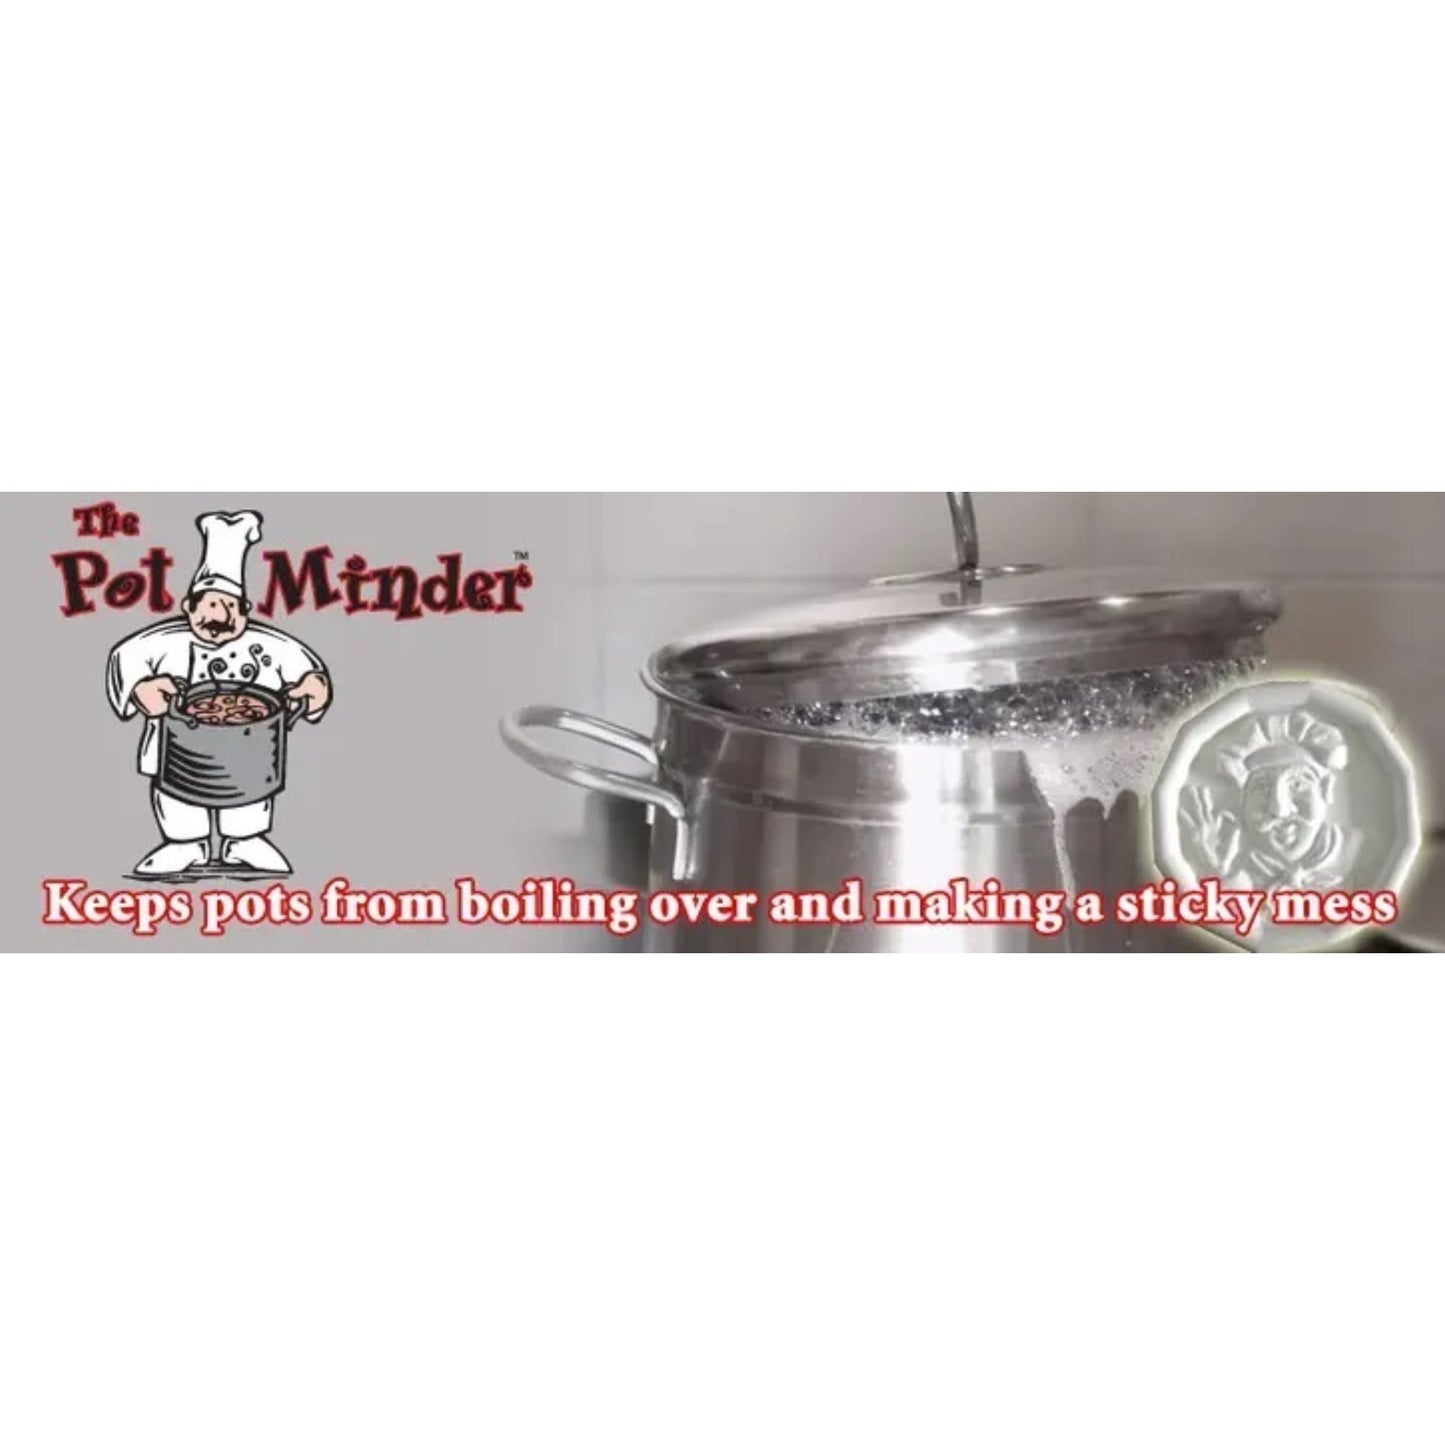 Chef Pot Minder - Made in the USA